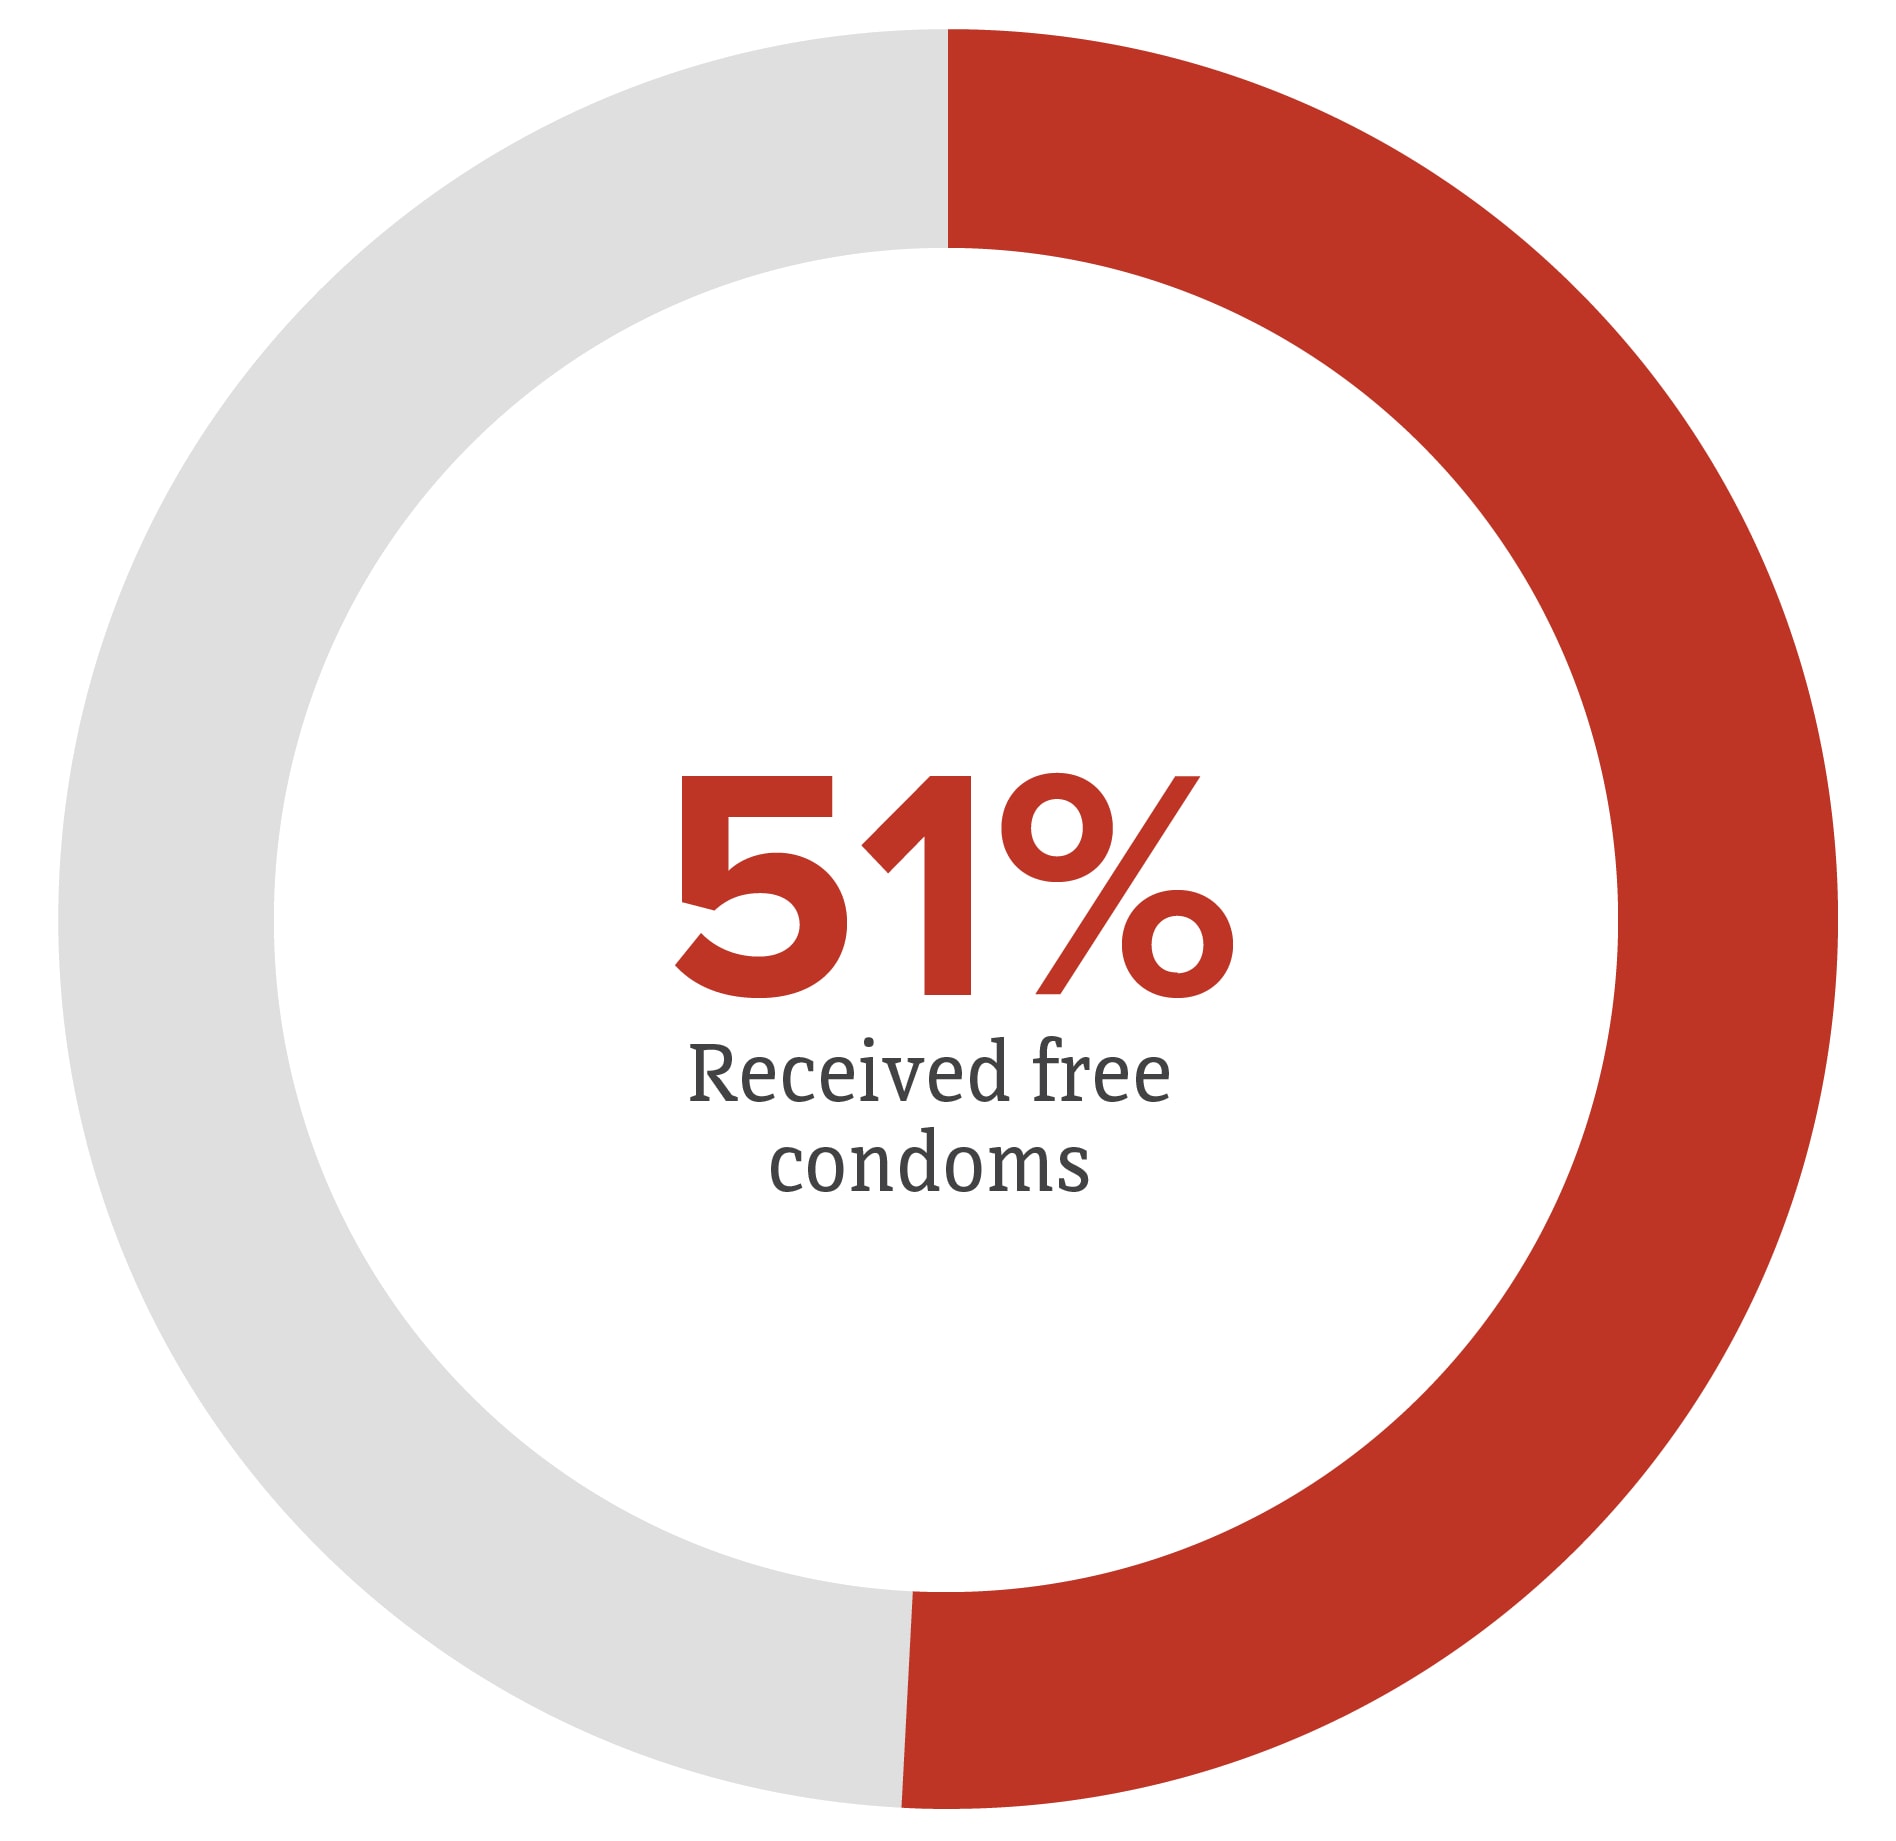 Pie chart showing 51% of men who have sex with men received free condoms.